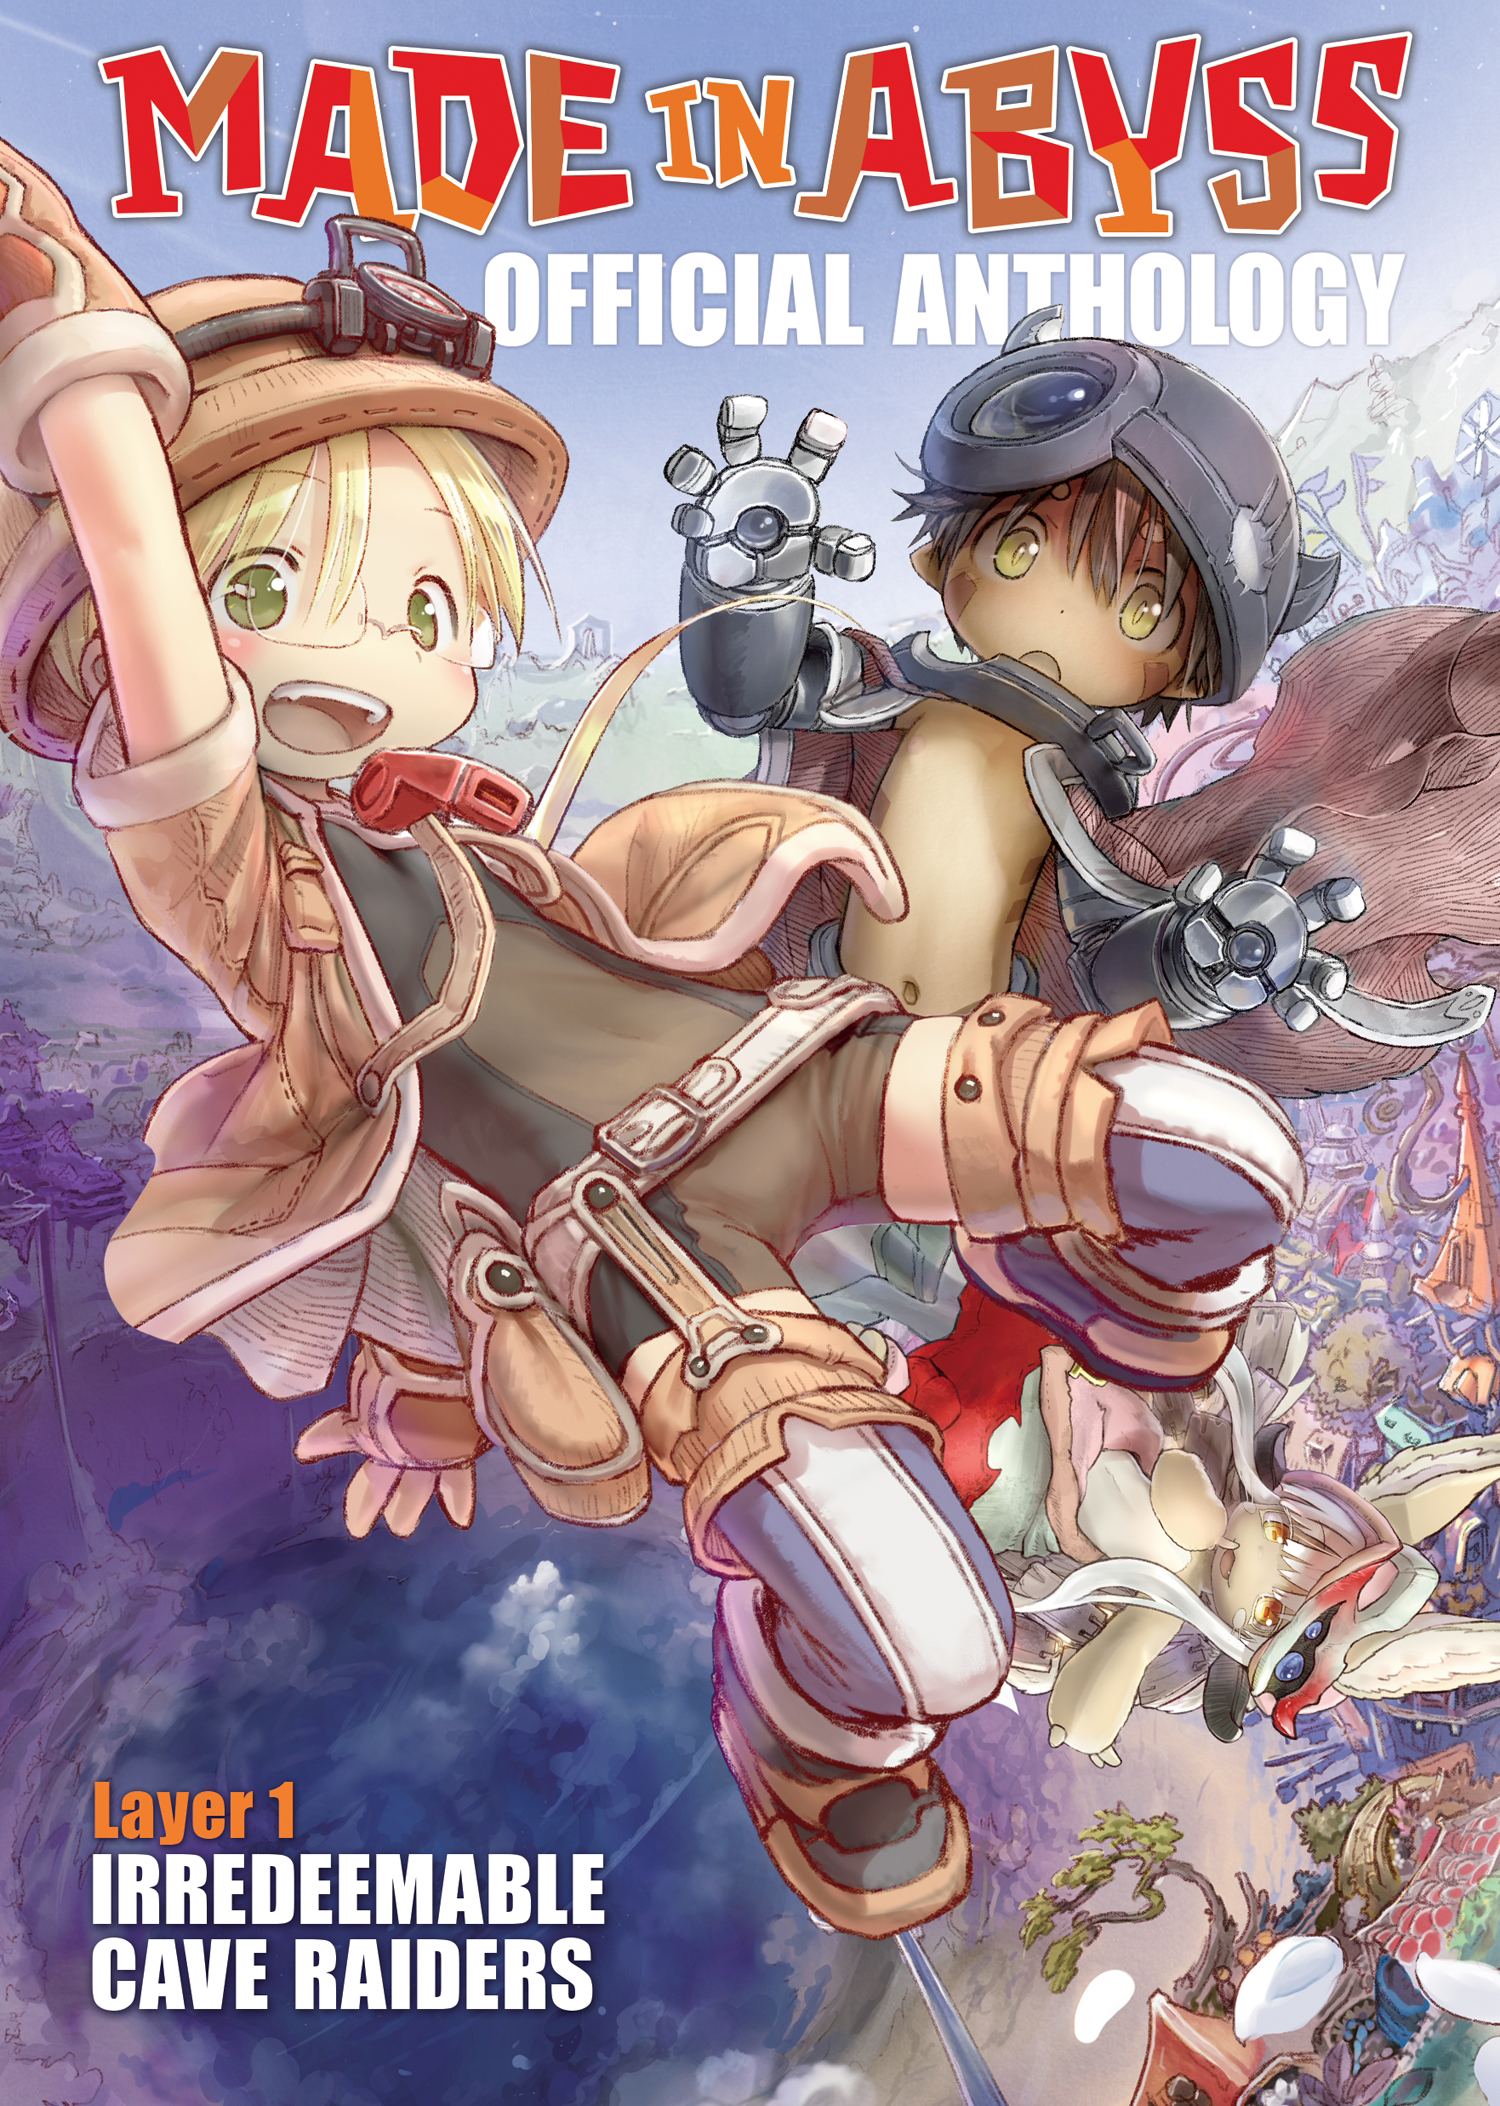 Made in Abyss  Seven Seas Entertainment